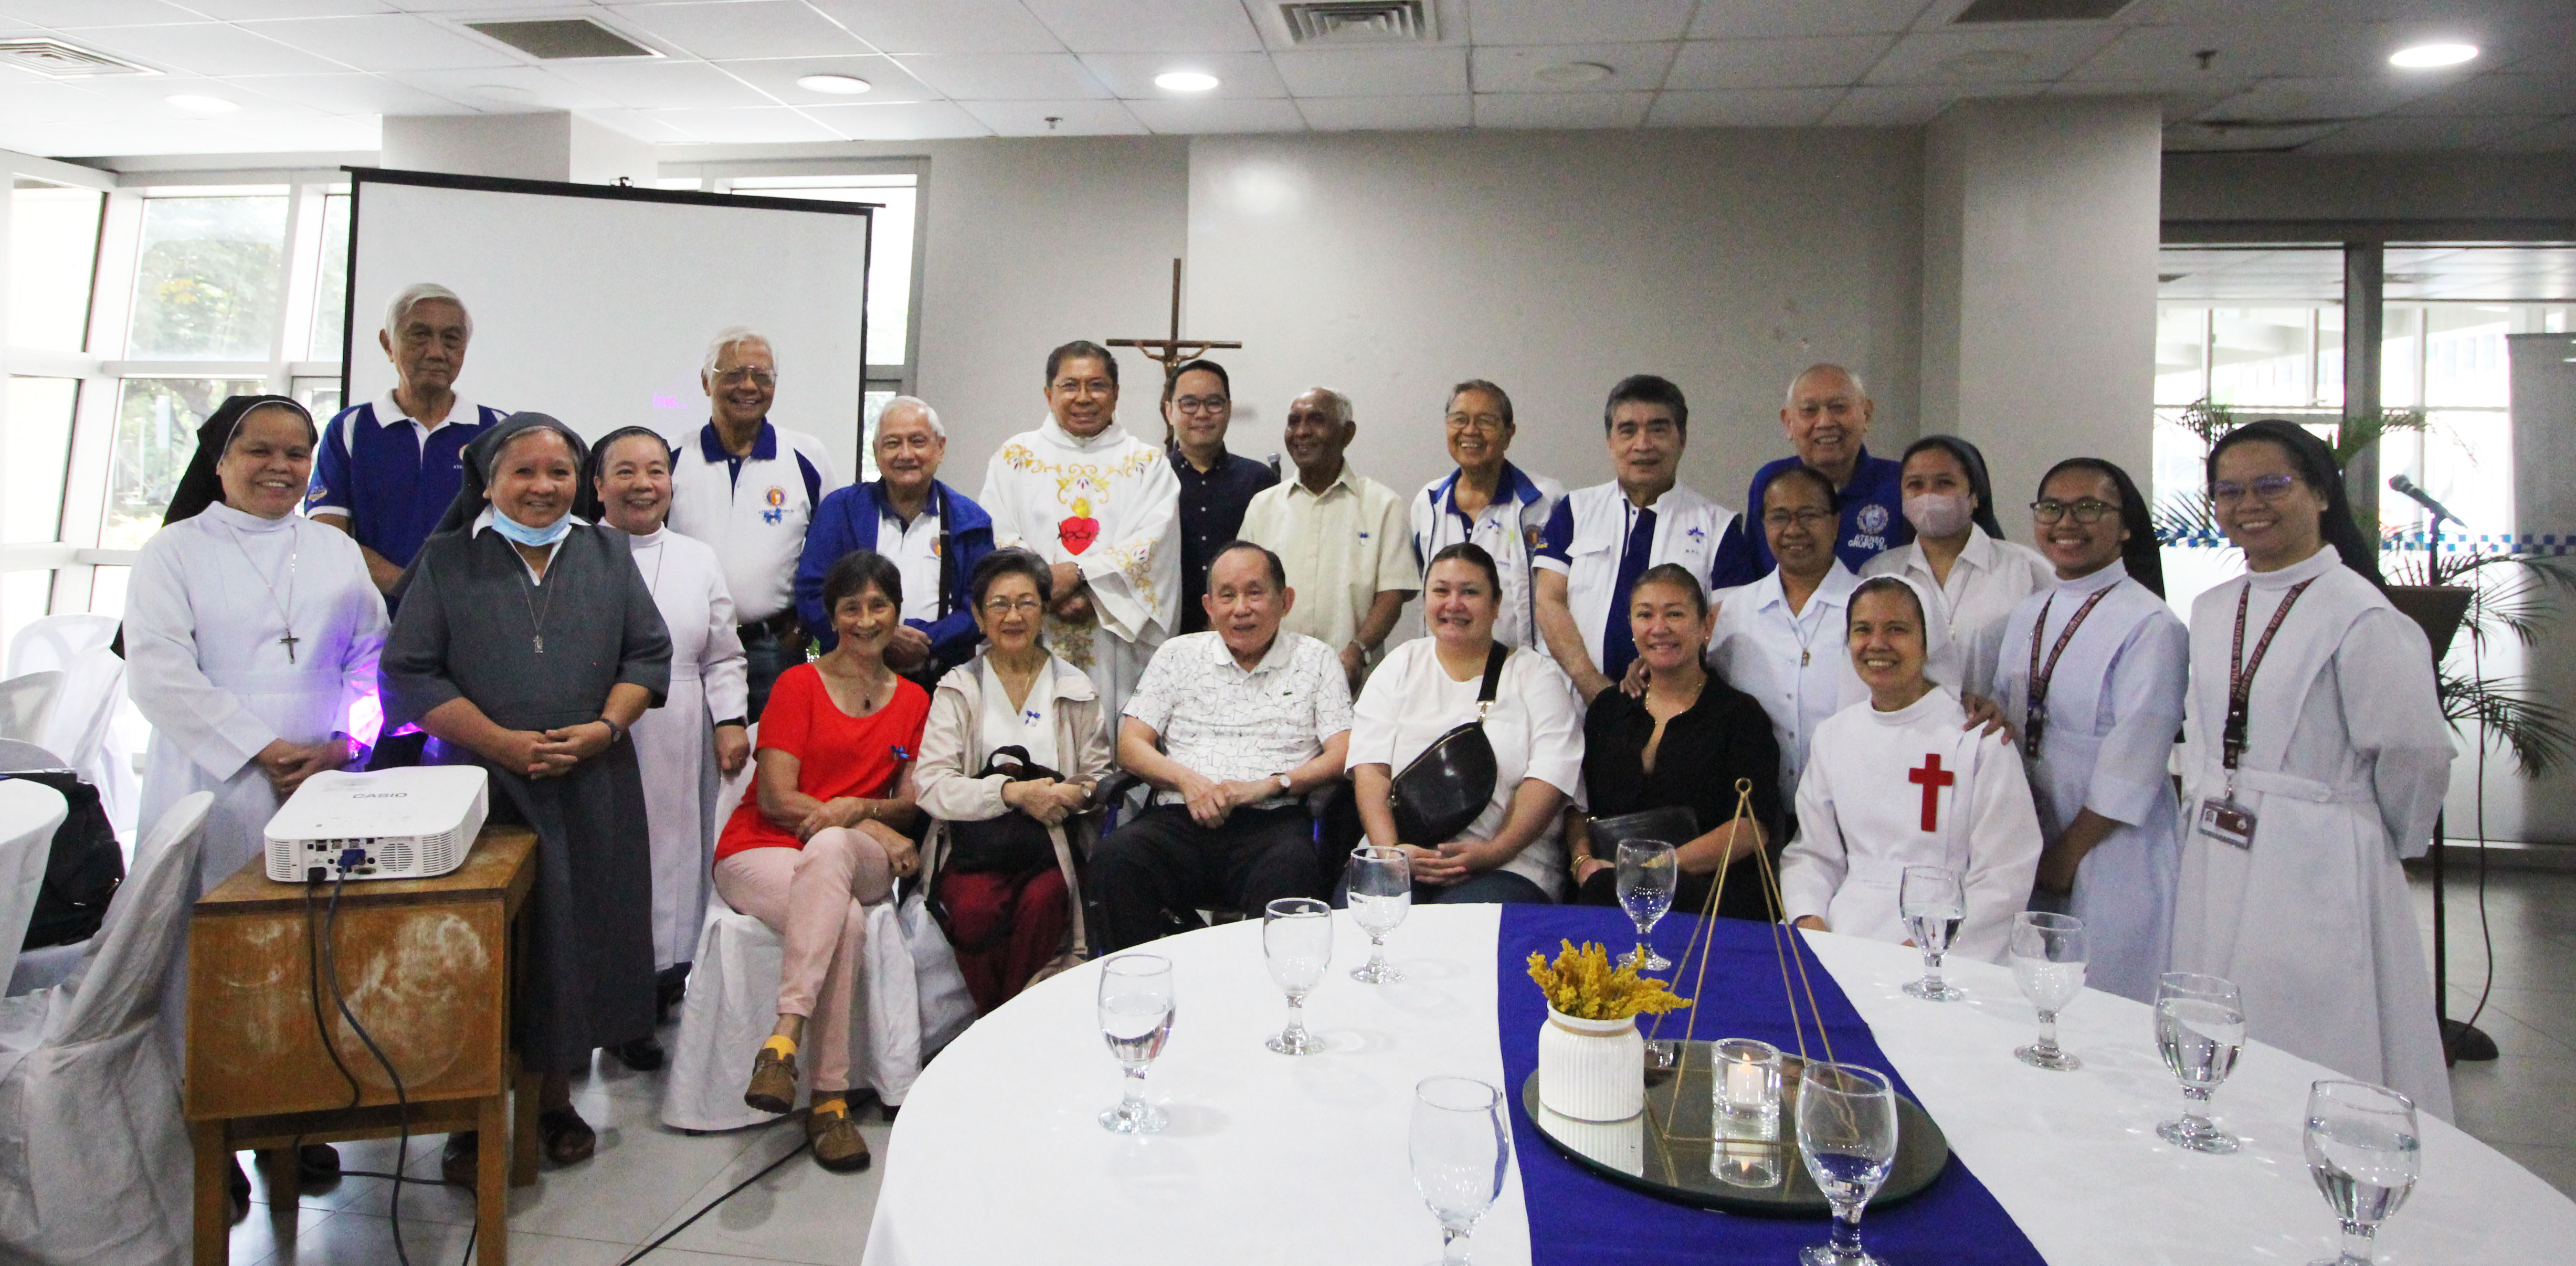 Sisters representing the Carmelite Sisters of Charity (Verduna); Missionary Catechists of the Sacred Heart; Religious of the Virhin Mary; and the Camillian Sisters together with members of the Ateneo HS Grupo’58. Standing from left to right: Randy Gavino, Rene Anel, Butch Bonoan, Fr. Manny Flores SJ, Eric Ledesma, Fr. Balch Balchand SJ, Timmy Nivera, Ray Lesaca and Johnny Romualdez. Seated from left to right Cora Anel, Estela Nivera, Art Ledesma, Verne Romualdez, and Ines Romualdez.